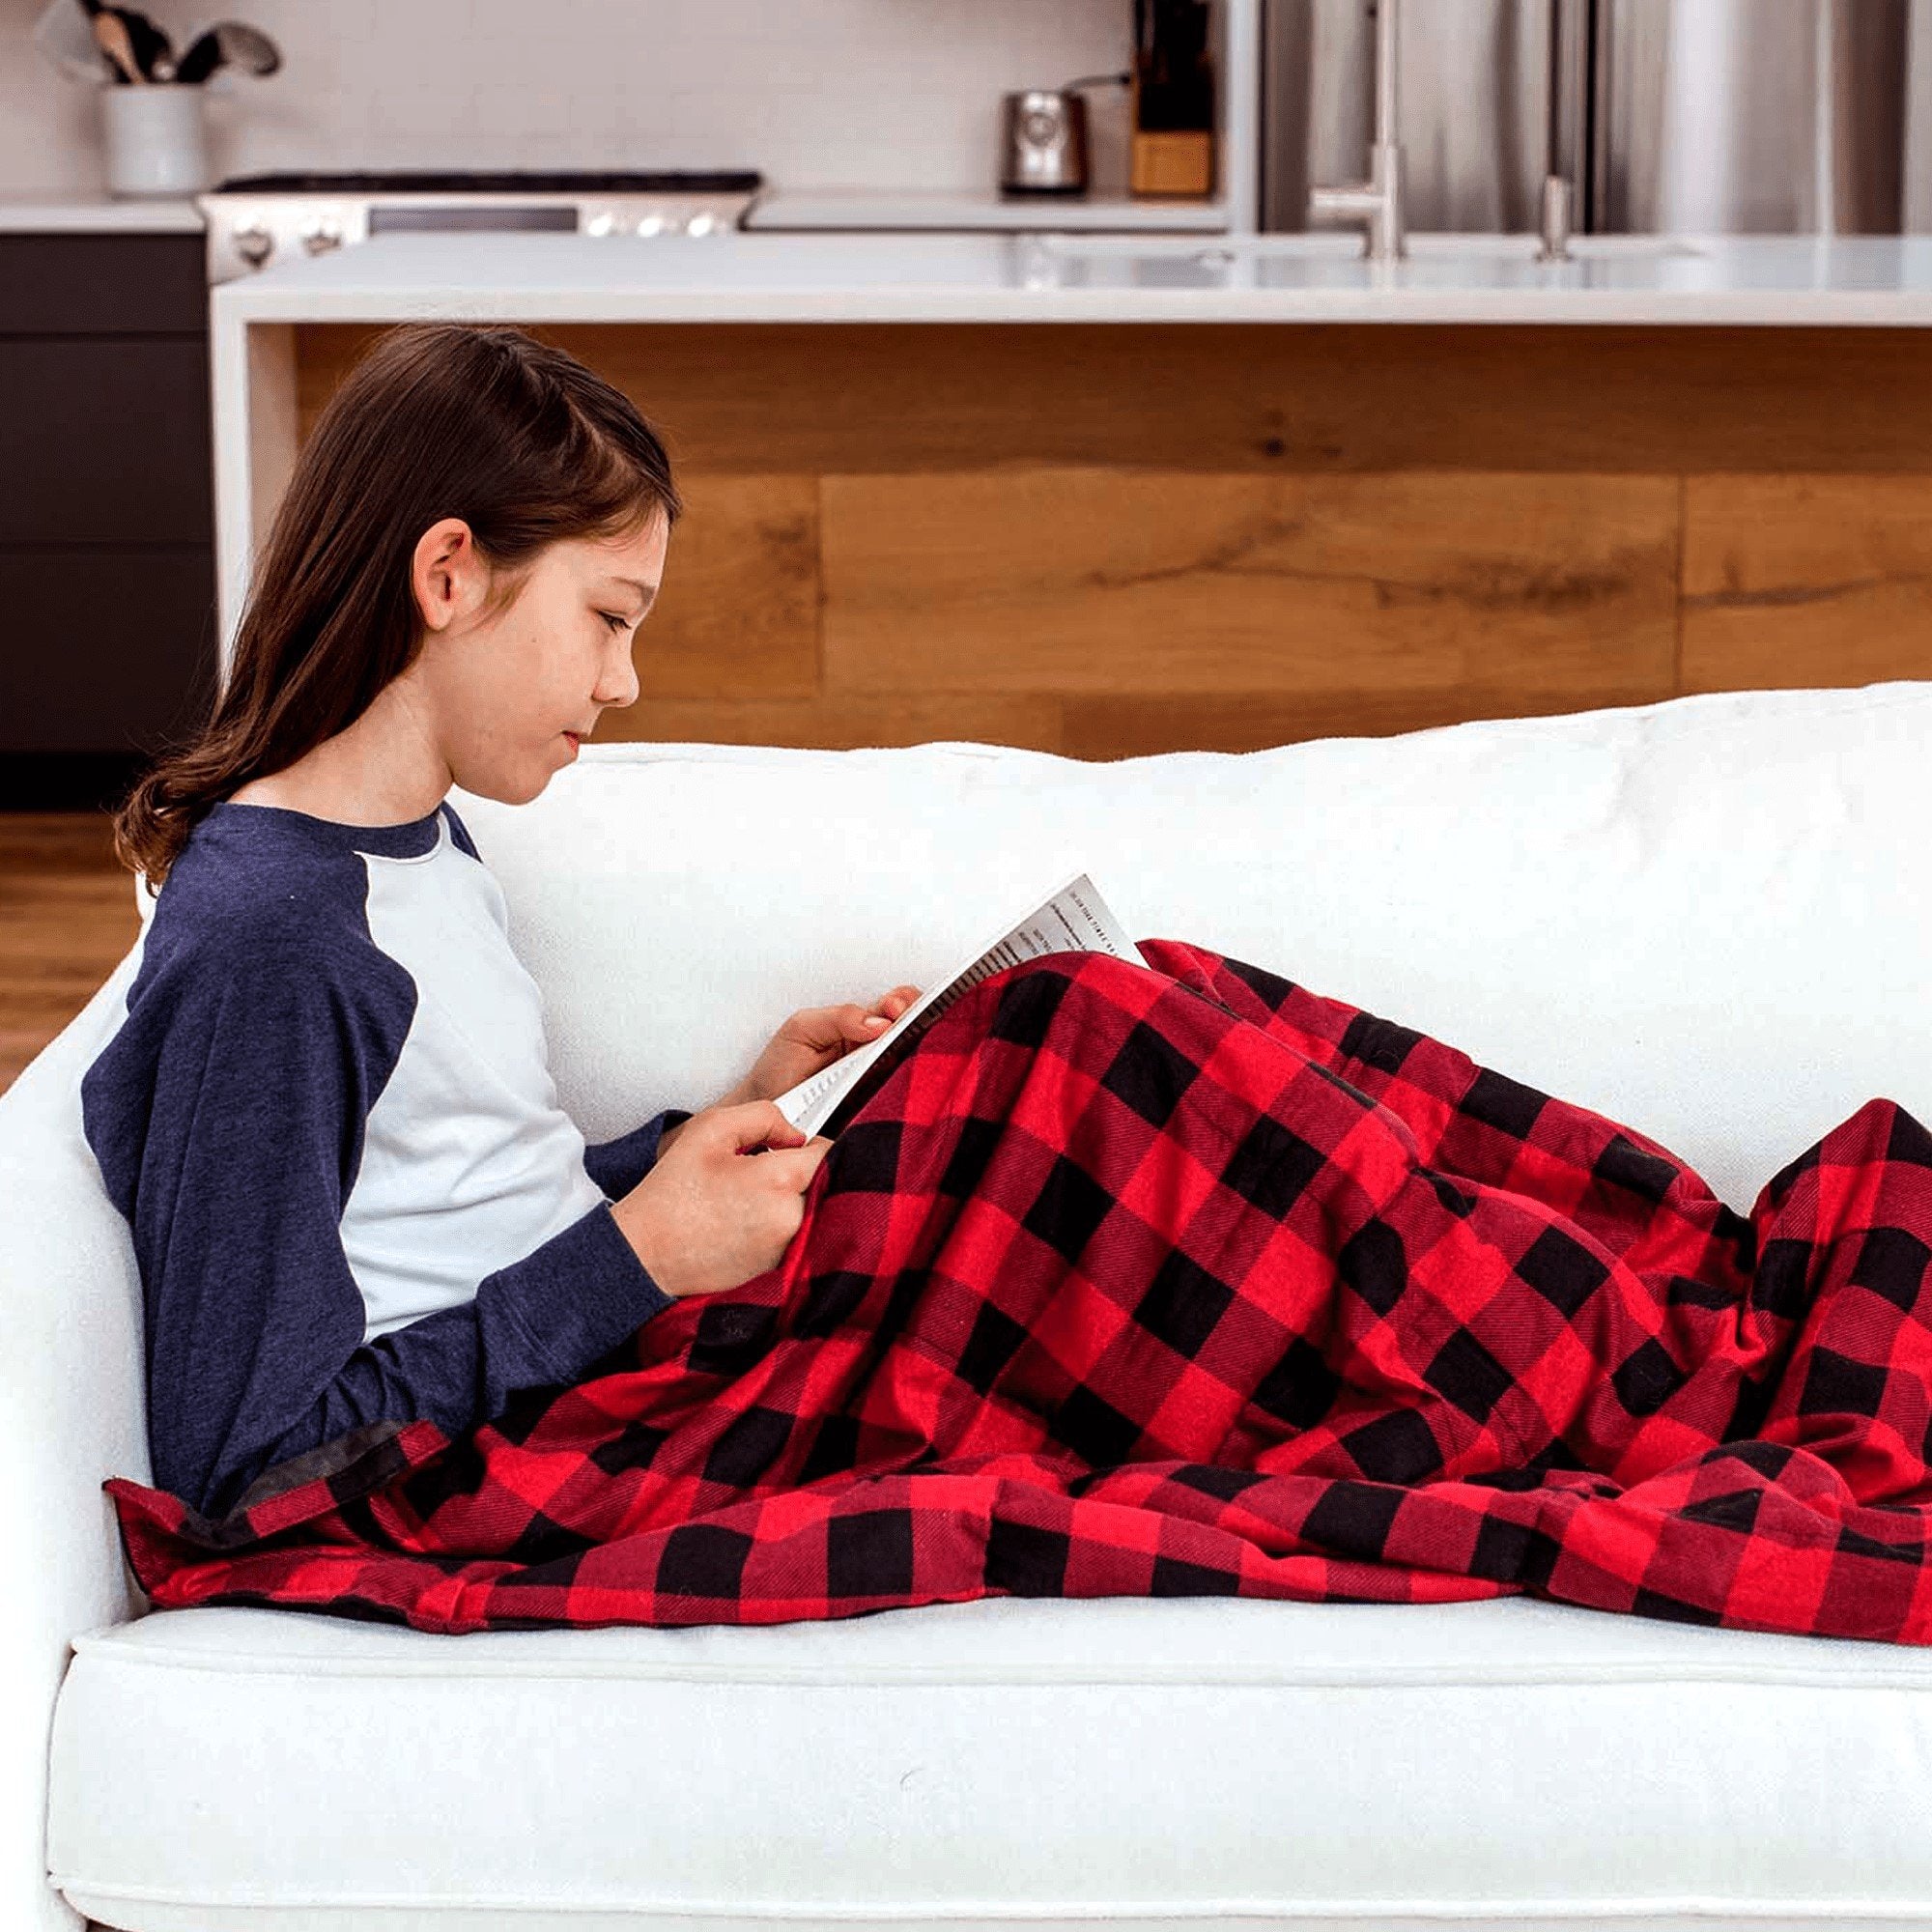 Child Reading And Sitting Under her Red And Black Plaid Weighted Blanket